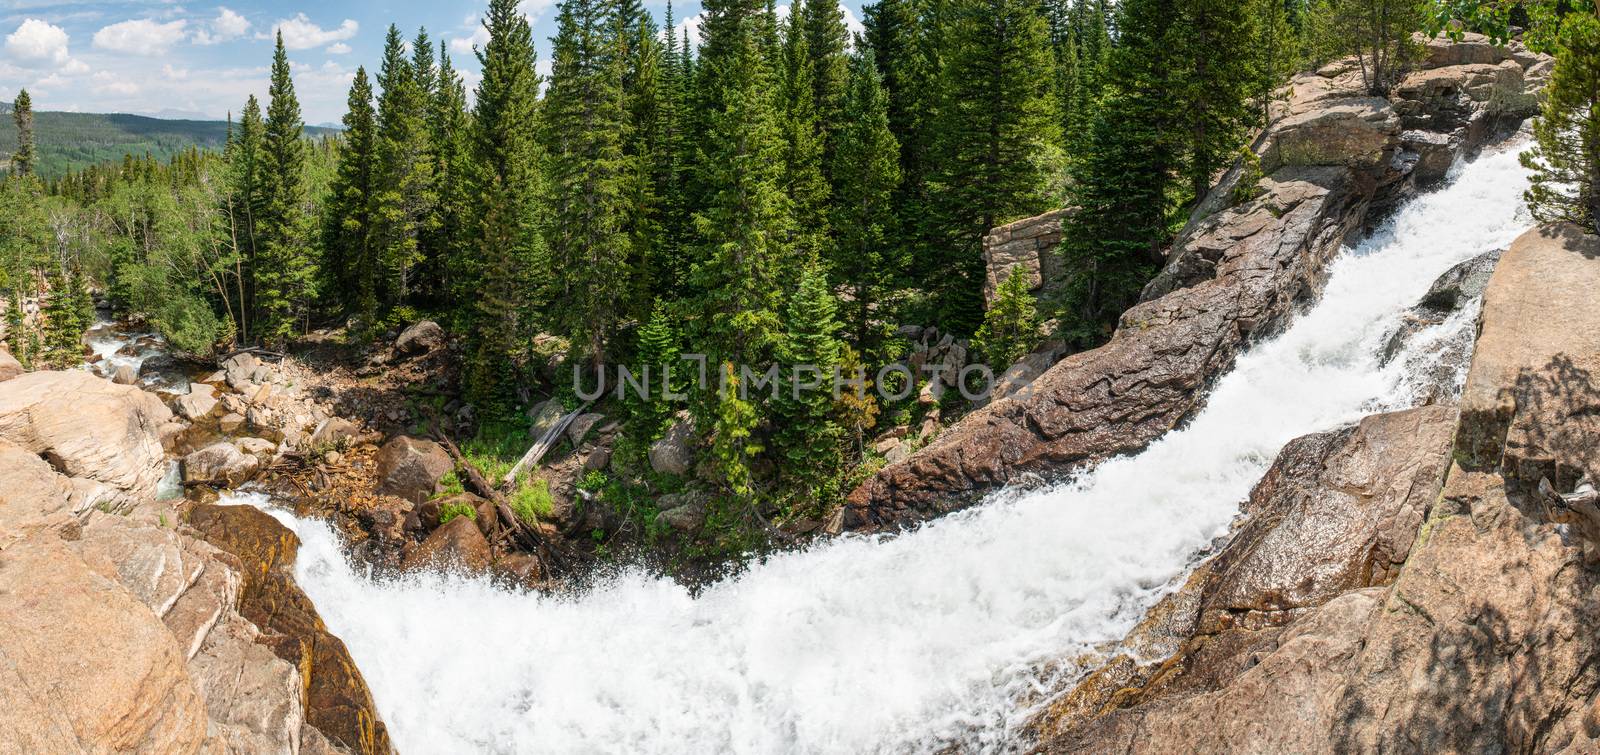 Panorama from Glacier Creek Trail to Alberta Falls in Rocky Mountain National Park, Colorado by Njean